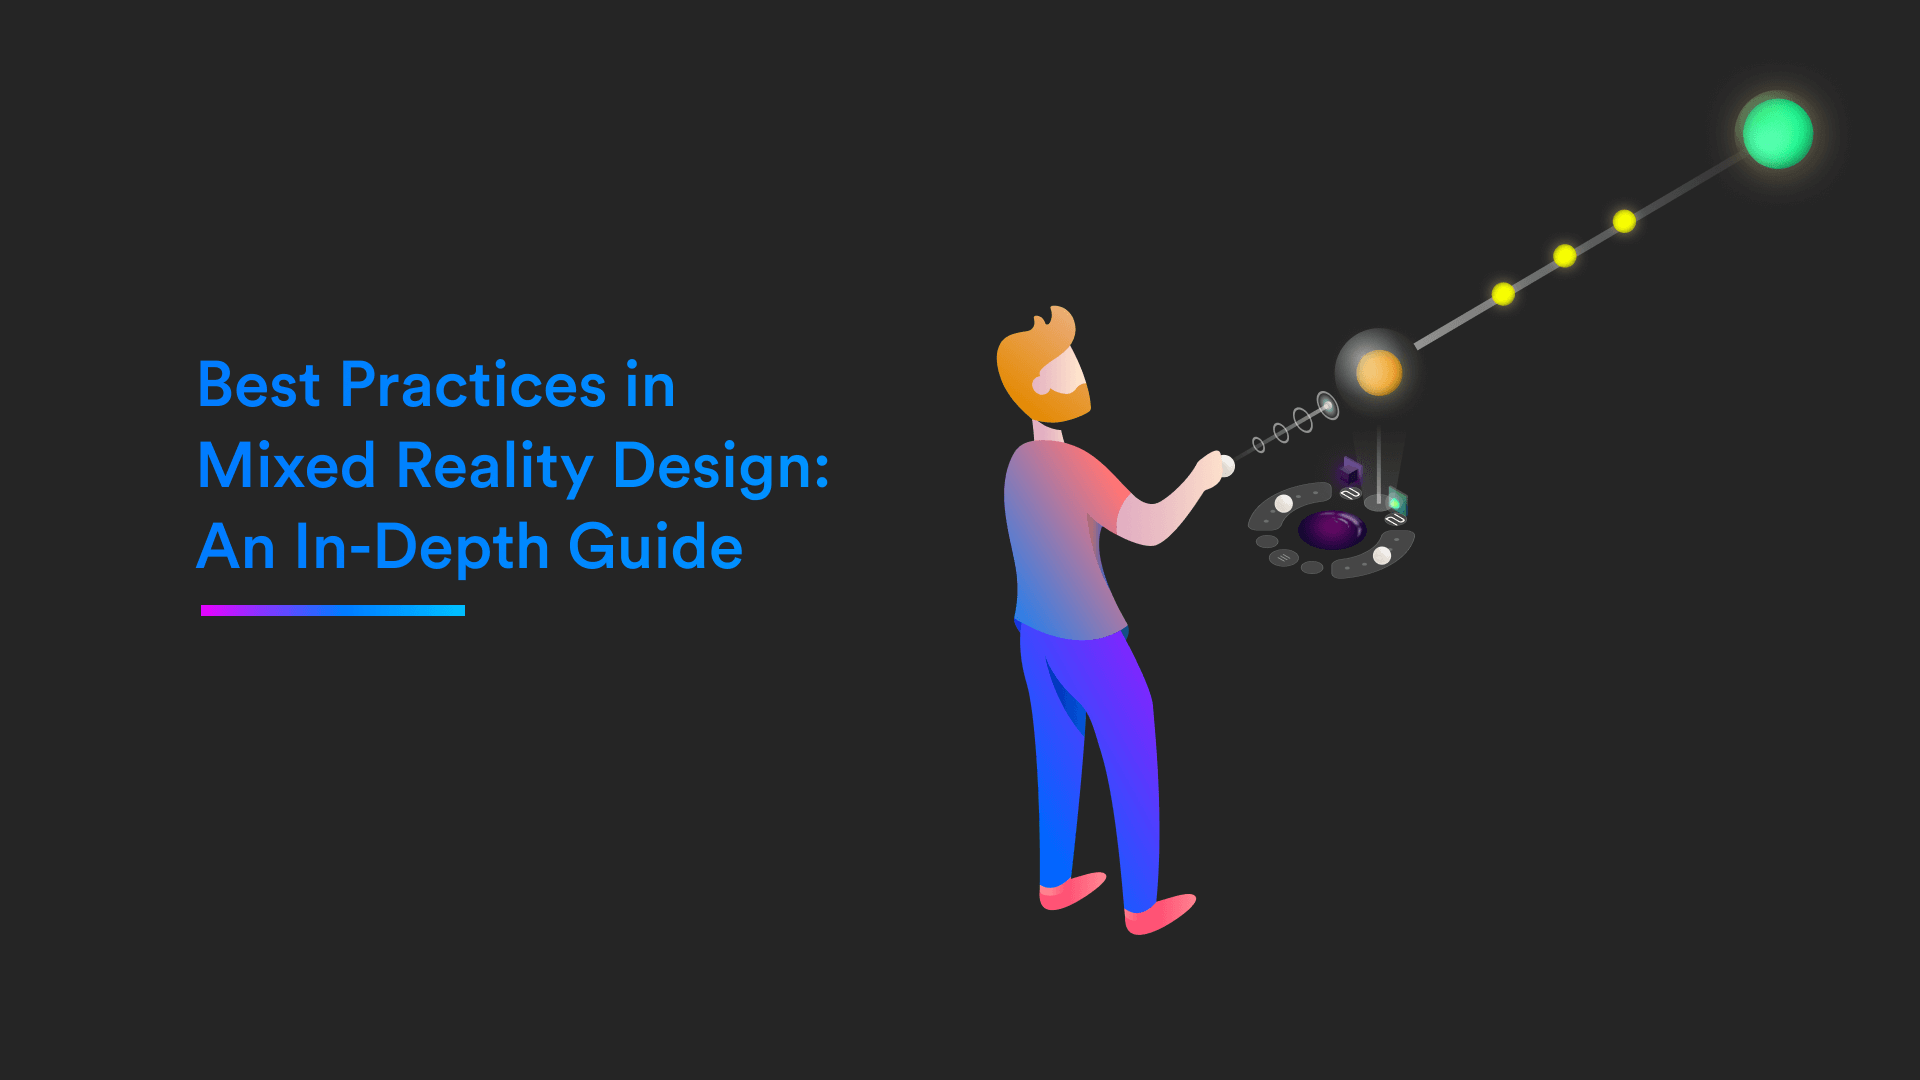 Best Practices in Mixed Reality Design: An In-Depth Guide